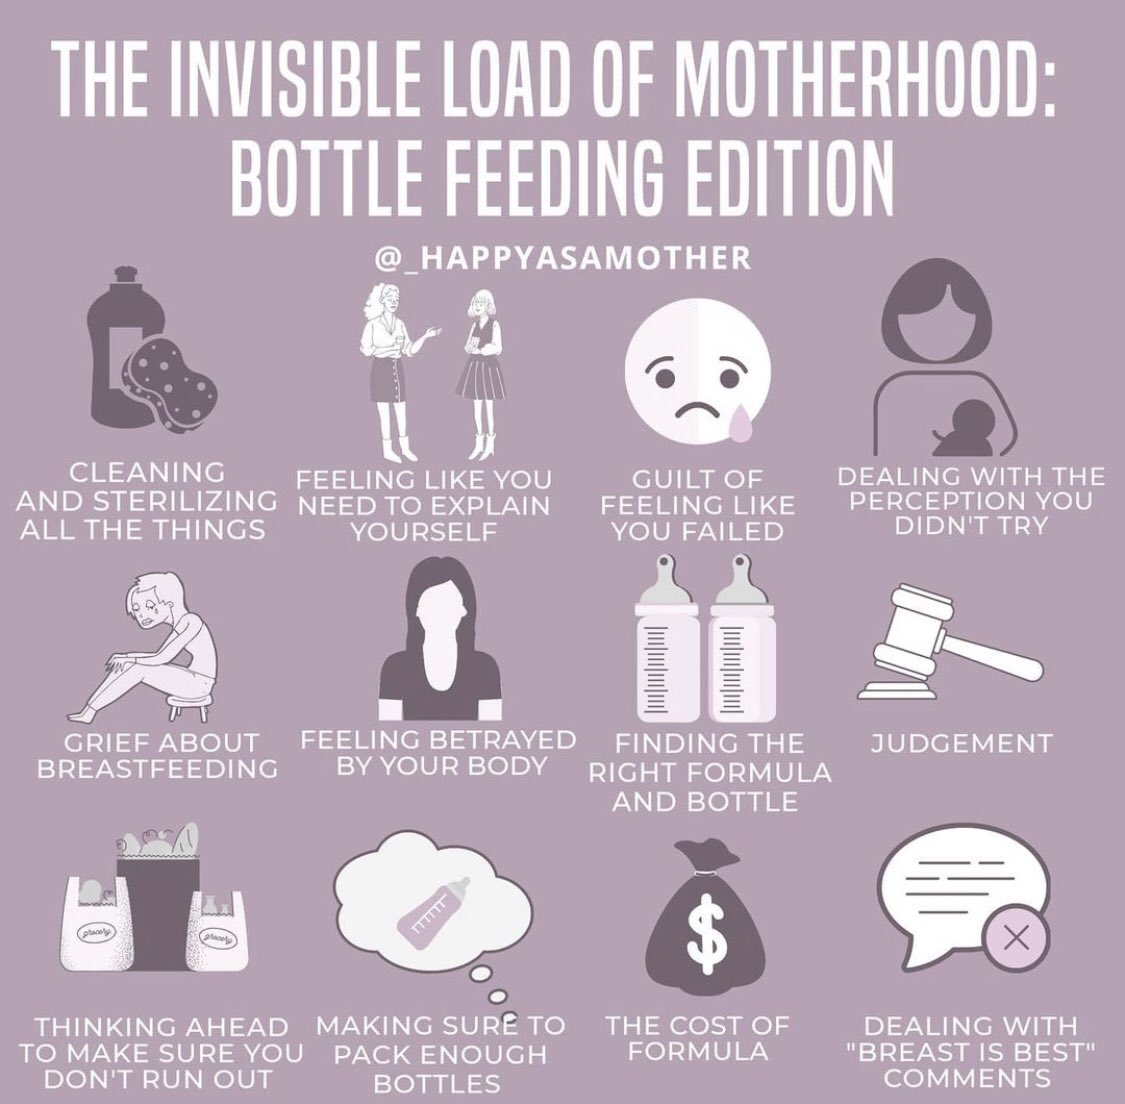 Everyone says breastfeeding is hard, but nobody talk about the struggles of formula feeding. Instead they all shame the mother who bottlefeed the baby.